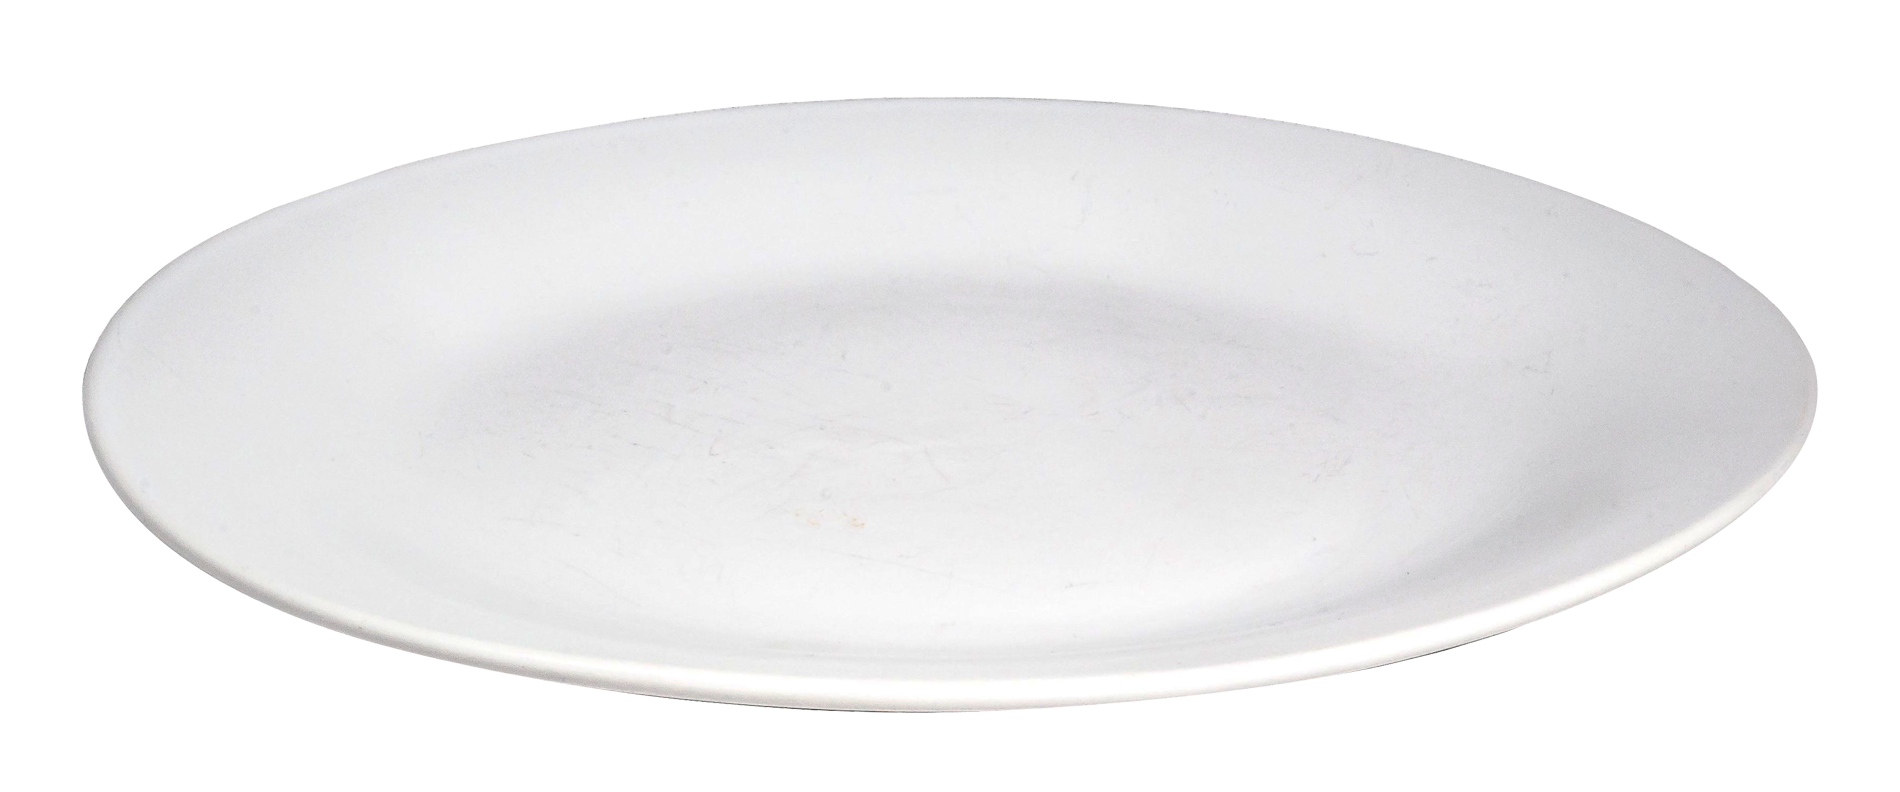 Download PNG image - Plates P